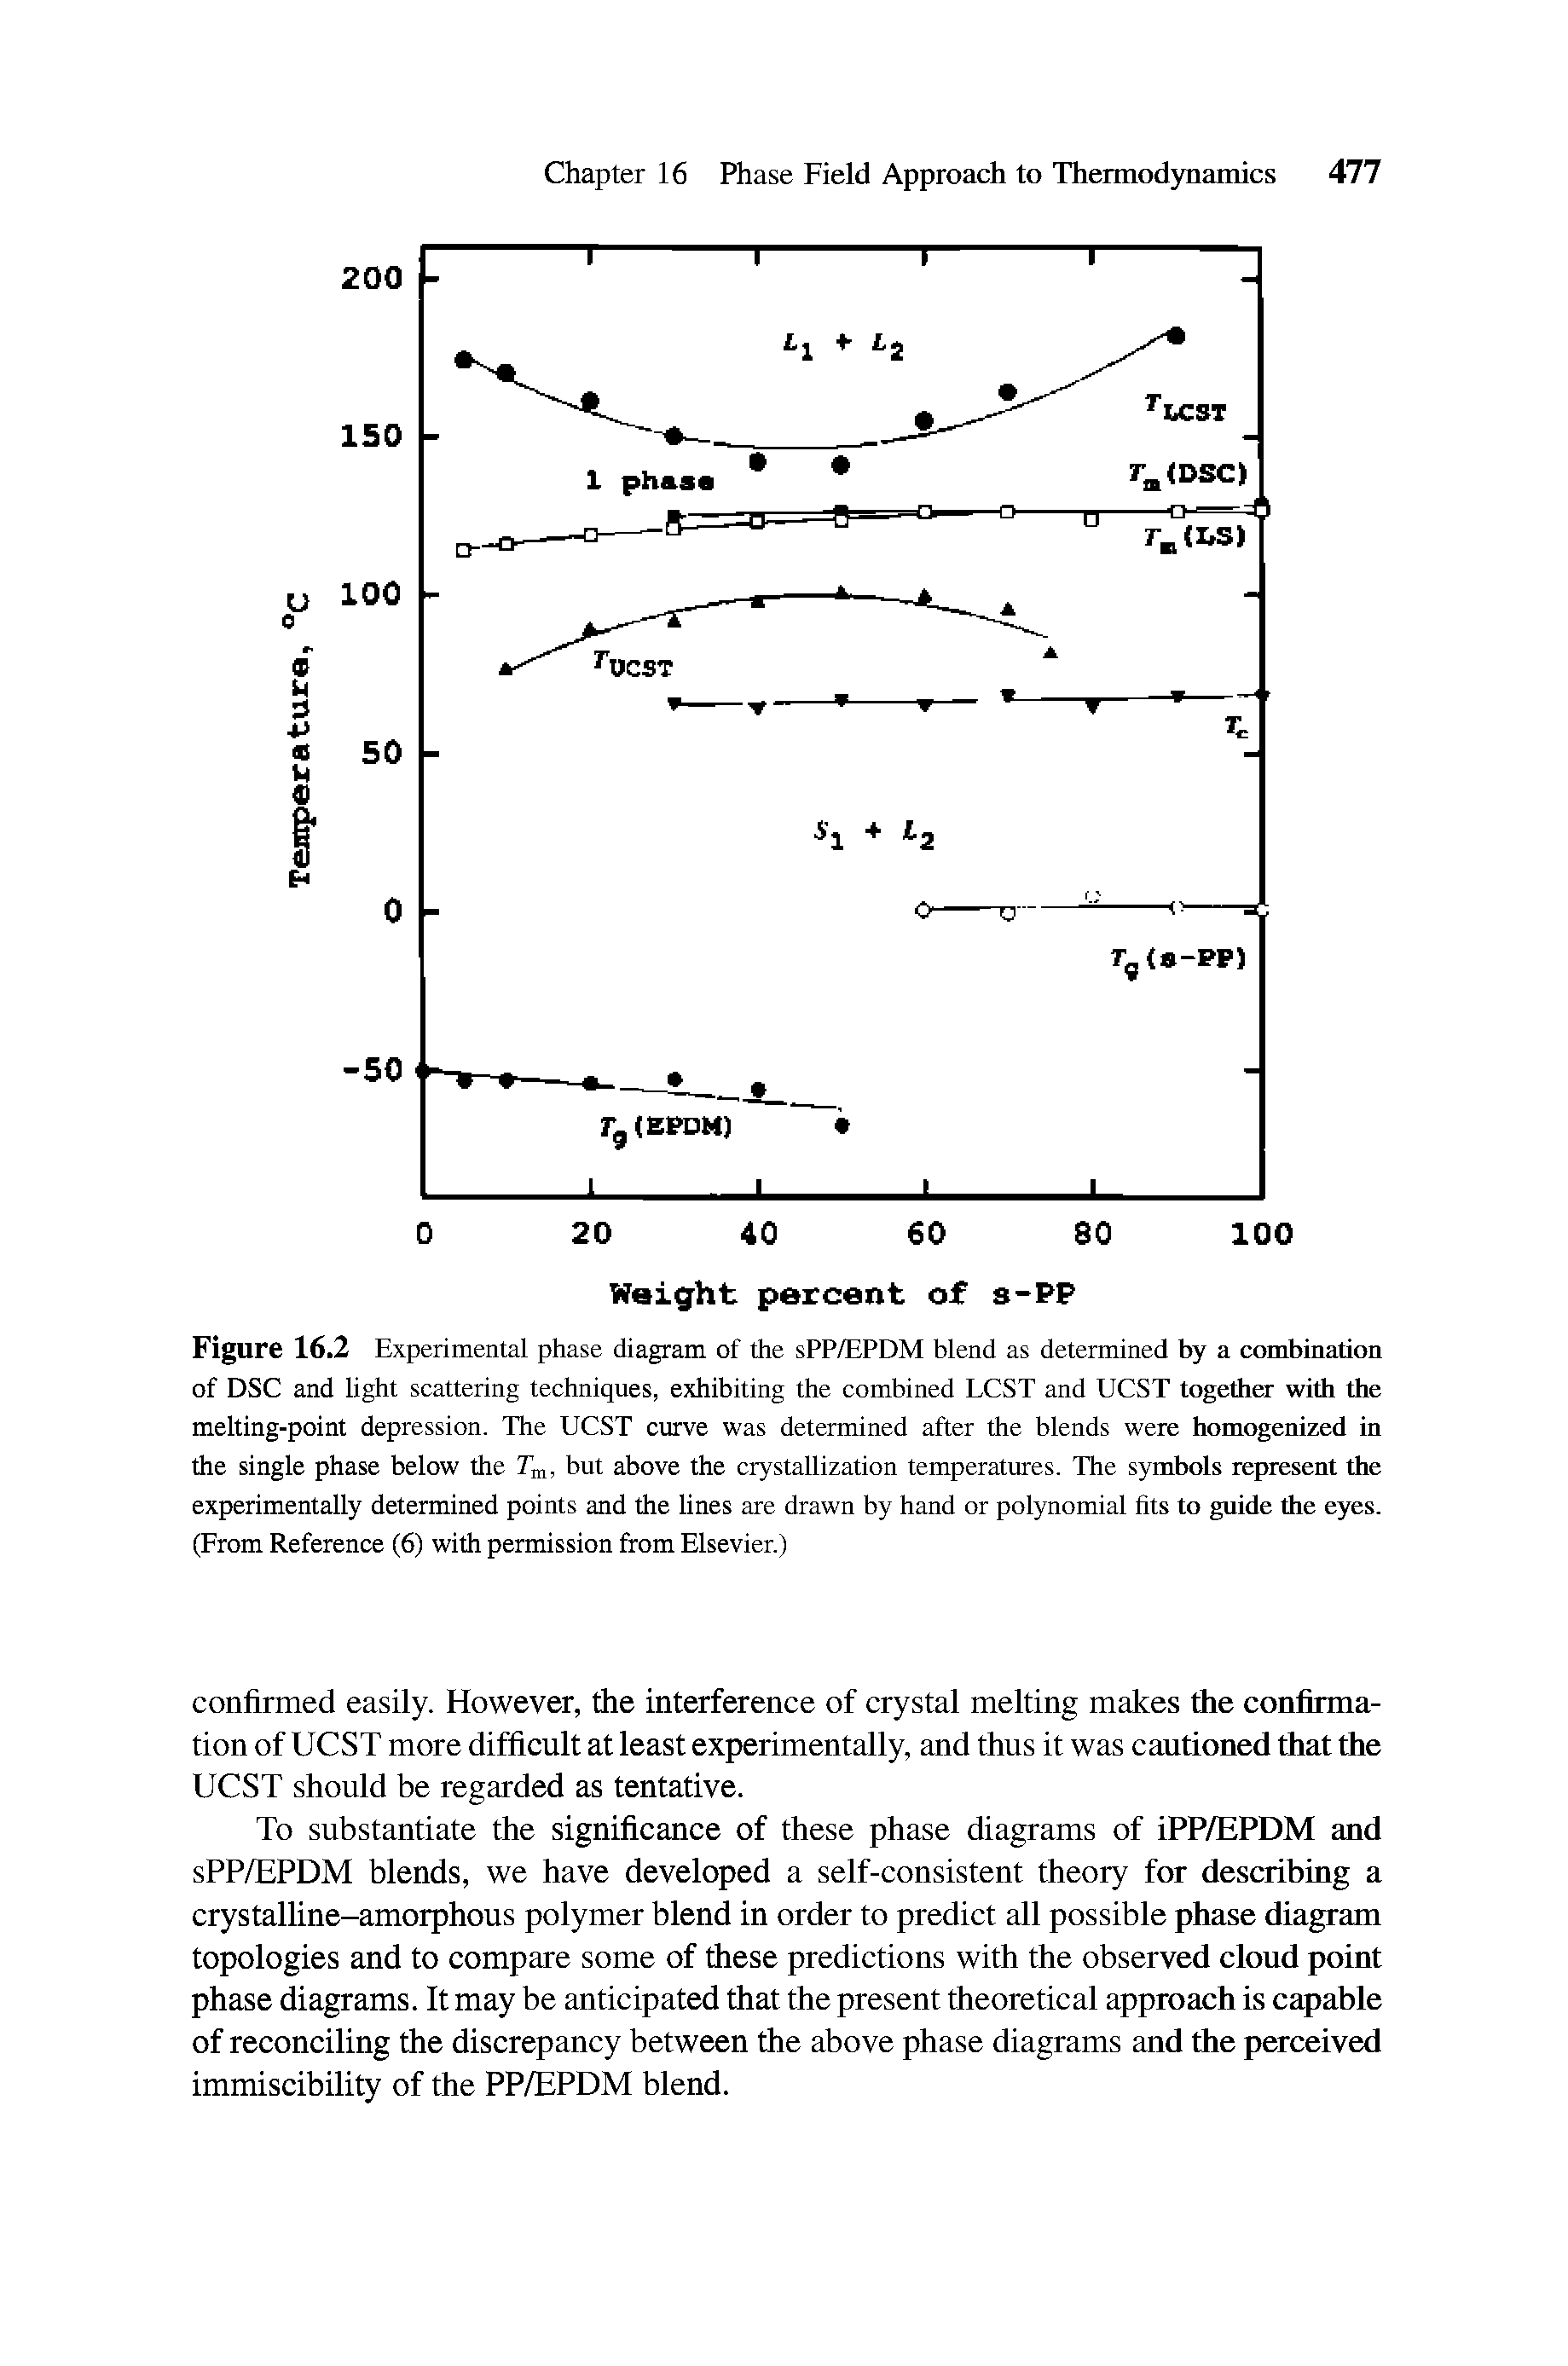 Figure 16.2 Experimental phase diagram of the sPP/EPDM blend as determined by a combination of DSC and light scattering techniques, exhibiting the combined LCST and UCST together with the melting-point depression. The UCST curve was determined after the blends were homogenized in the single phase below the T, but above the crystallization temperatures. The symbols represent the experimentally determined points and the lines are drawn by hand or polynomial hts to guide the eyes. (From Reference (6) with permission from Elsevier.)...